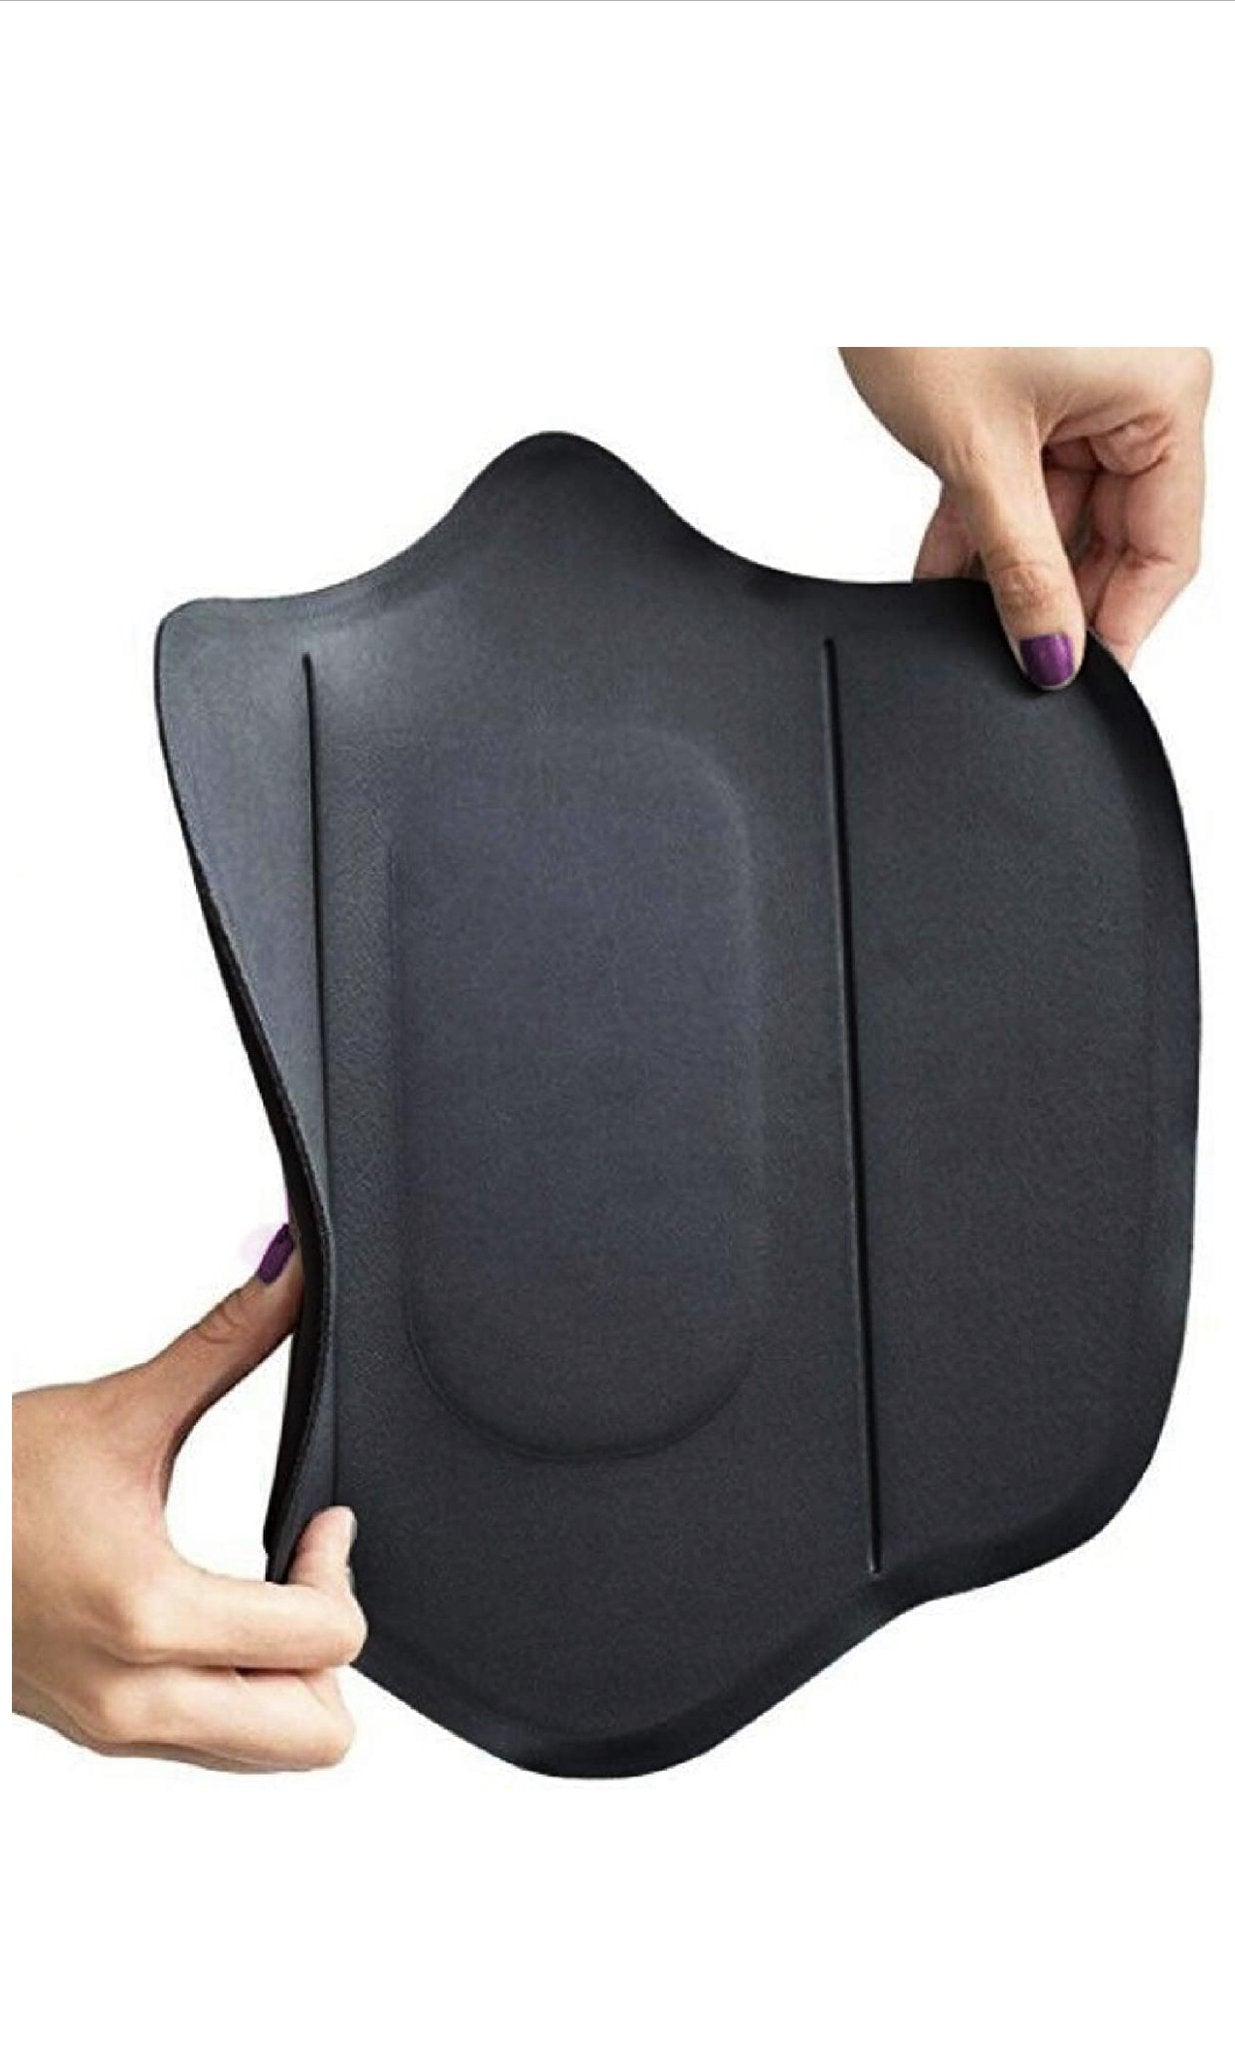 Wholesale Brazilian Butt Lift Seat Cushion for Surgery Recovery Belly  Button Plug Post Tummy Tuck Tabla Abdominal Post Surgery Lipo Foam From  m.